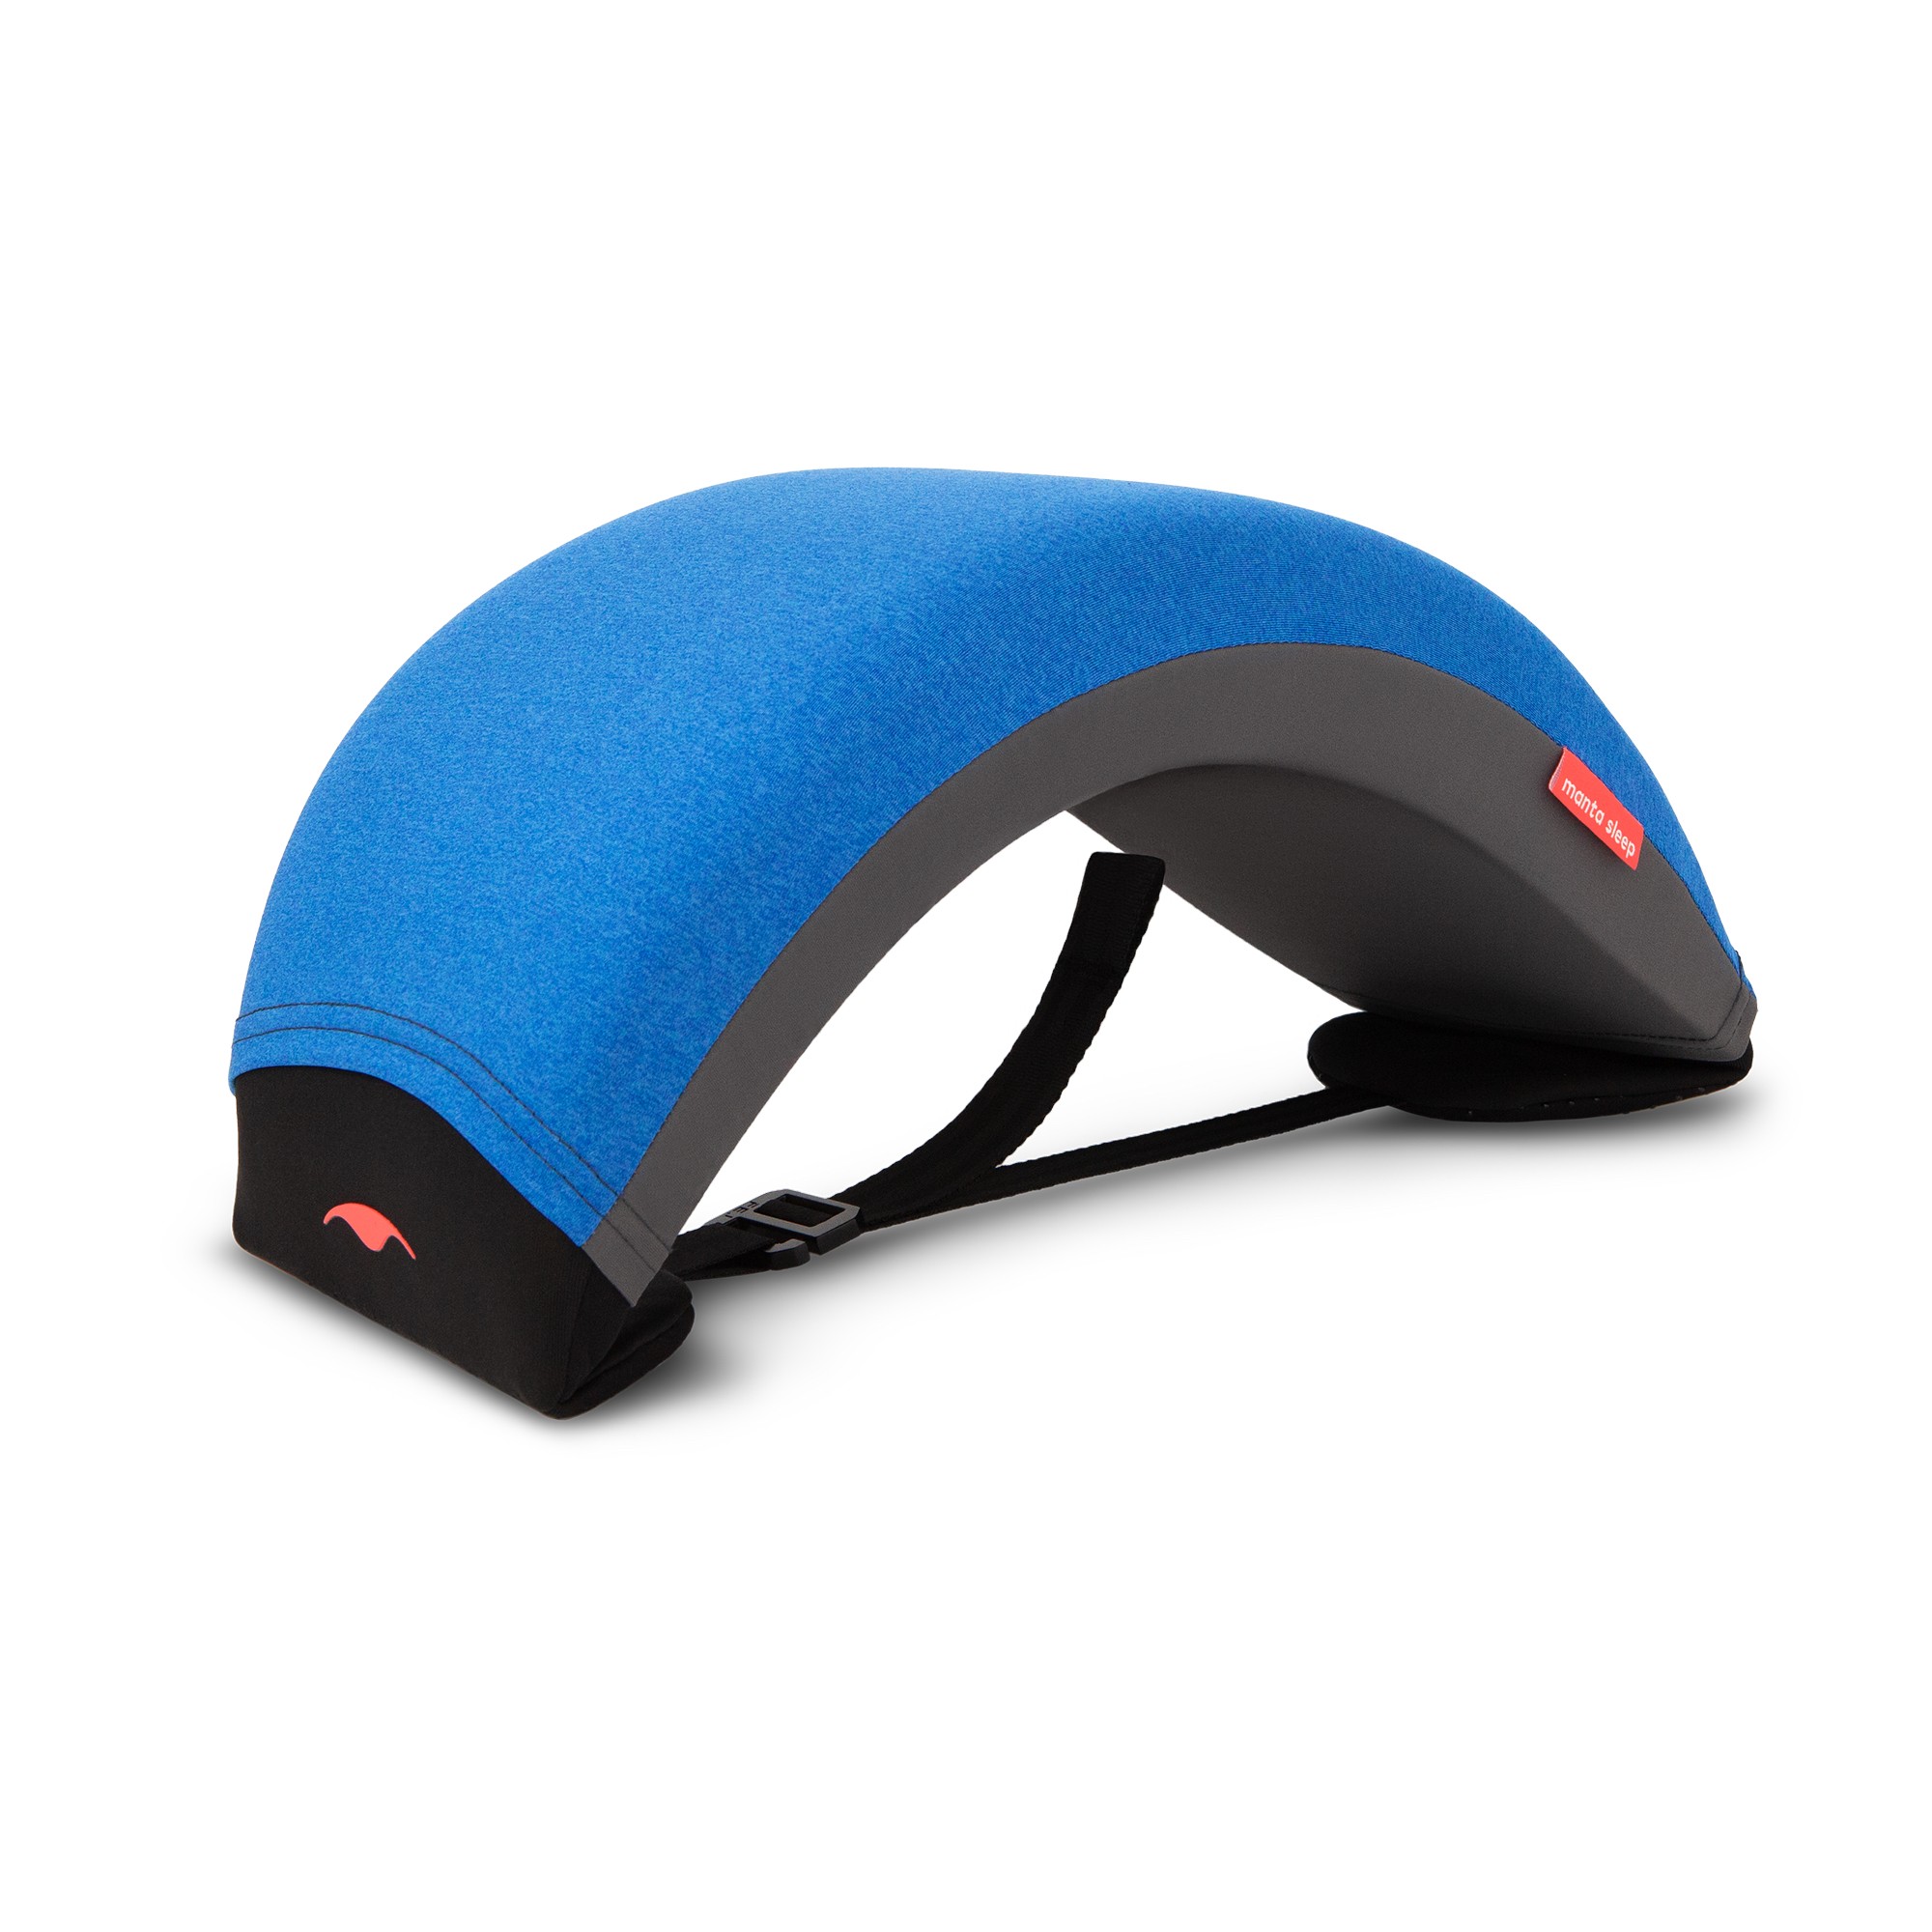 A blue nap pillow shaped like an arc for power naps.